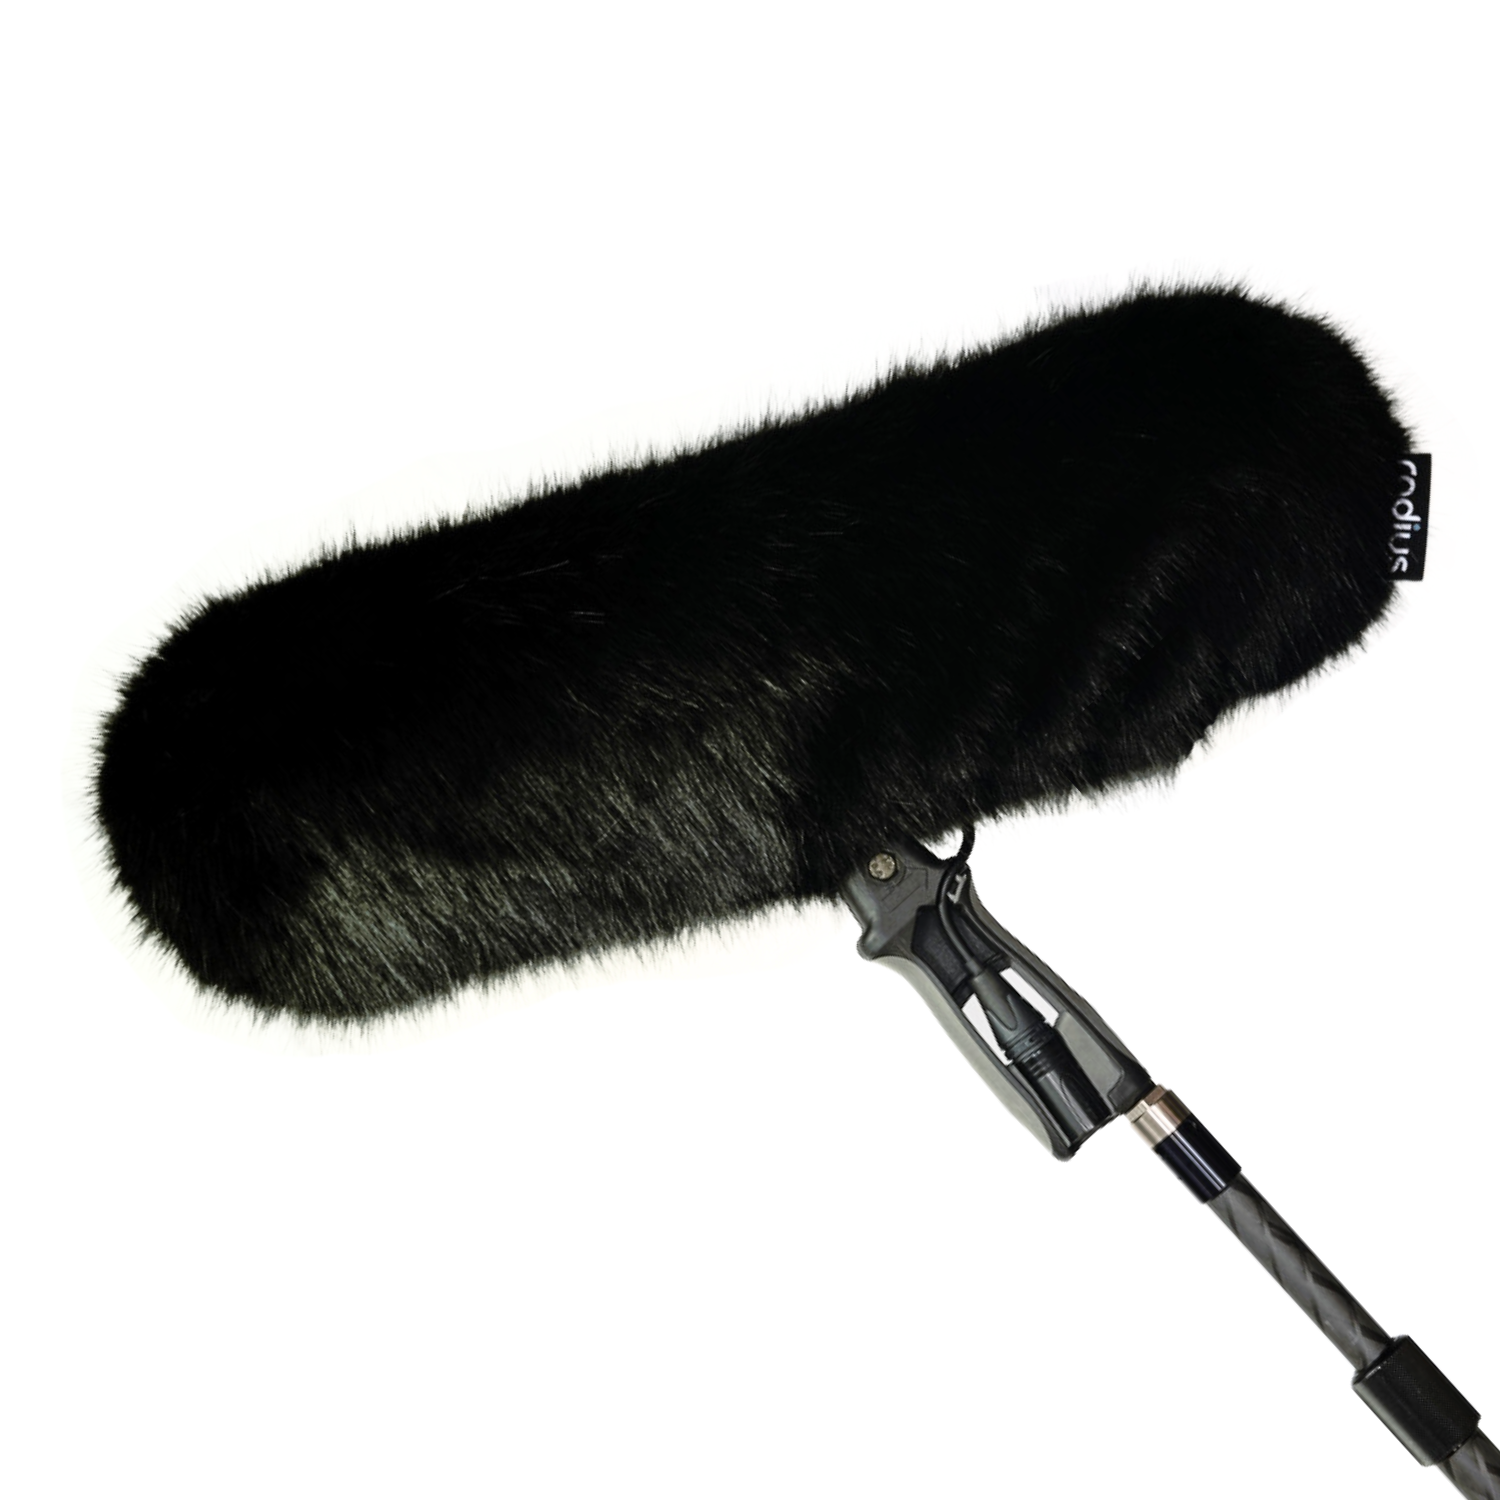 Replacement Windcover for Rycote Supershield, Medium, Black Fur